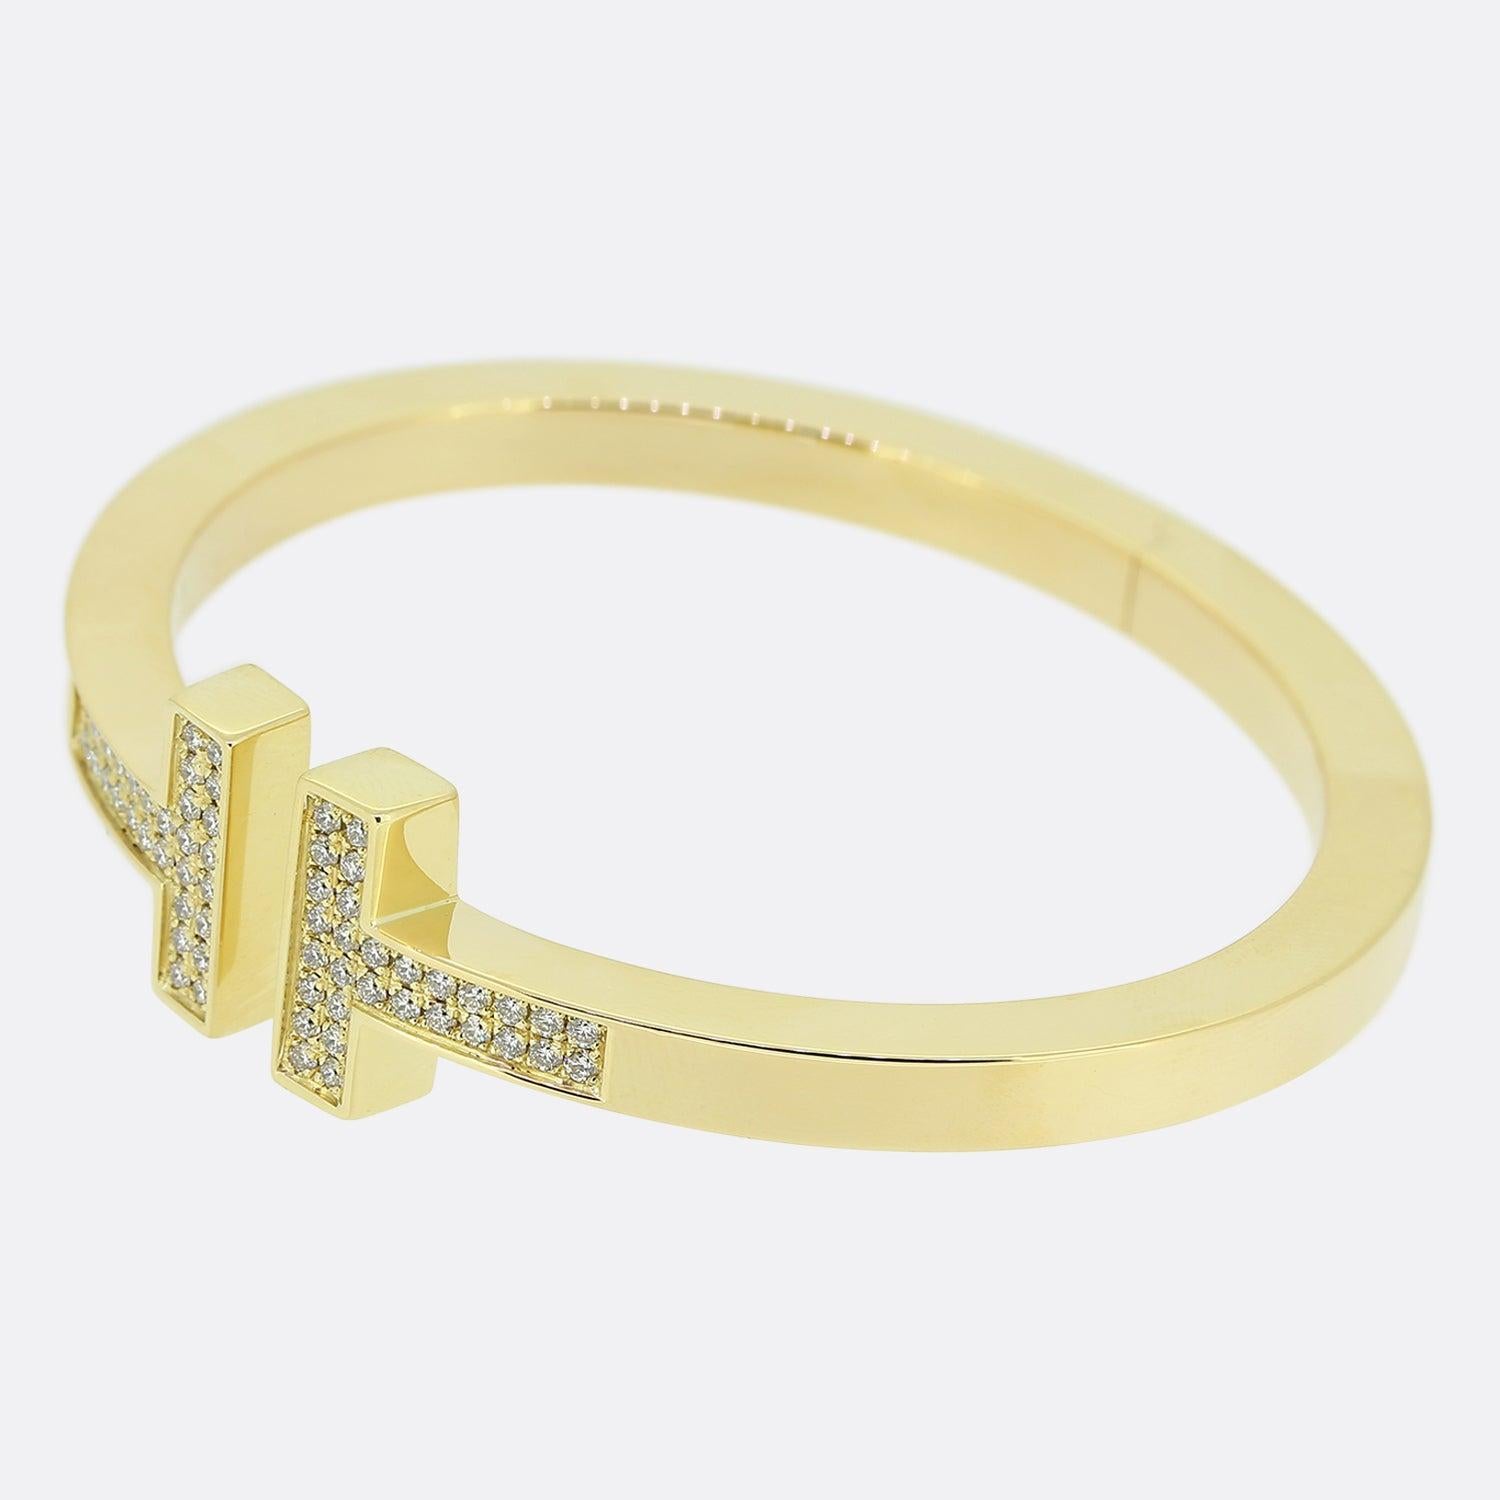 Here we have a modern, sophisticated bangle from the world renowned jewellery designer, Tiffany & Co. An 18ct yellow gold bracelet has been crafted into Tiffany's iconic double T design and pavé set with 60 round brilliant cut diamonds. 

Condition: